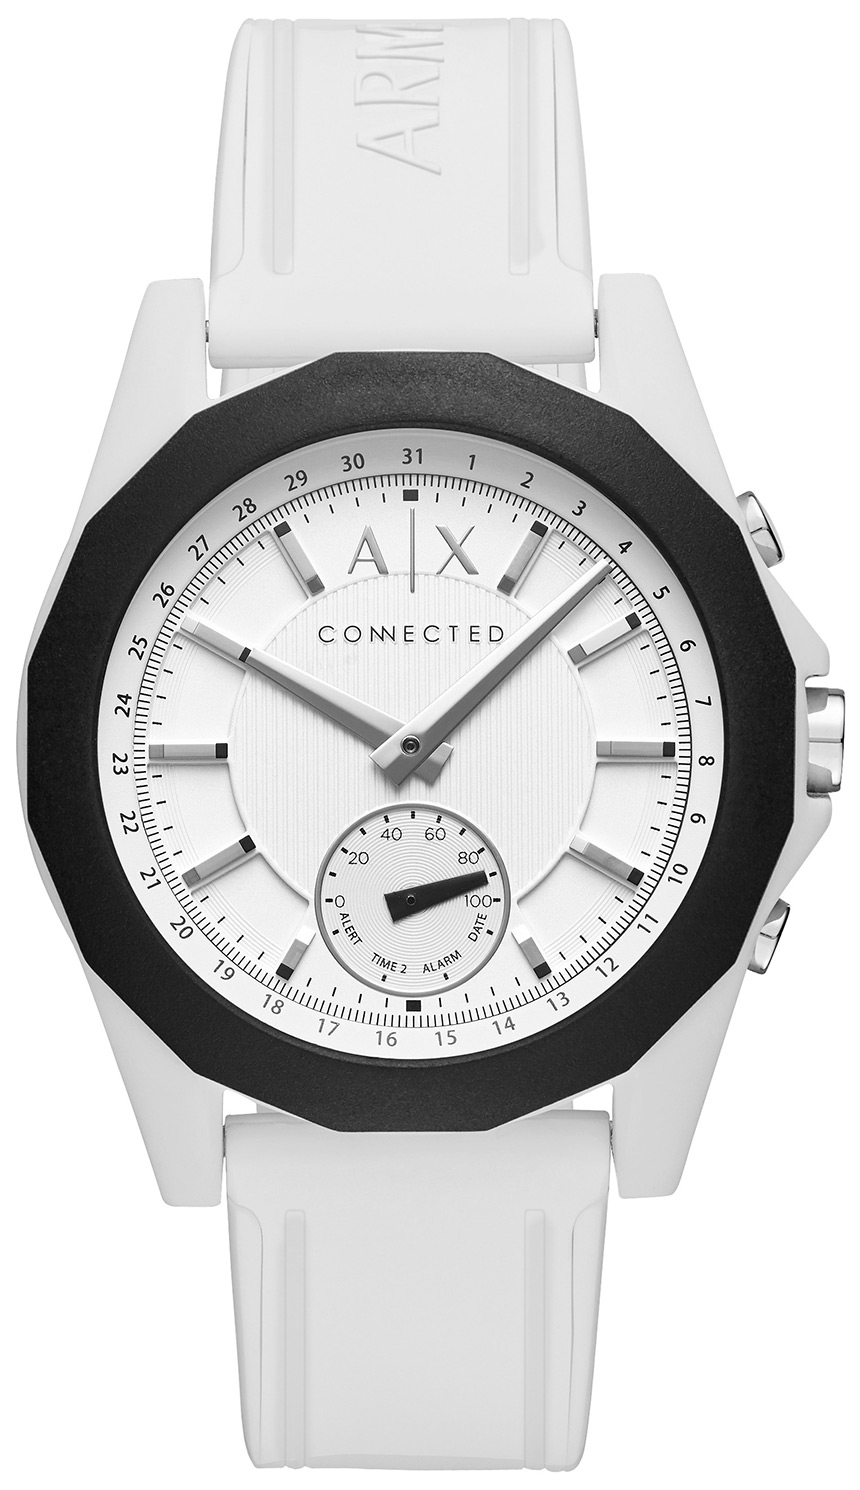 Armani Exchange AX Connected Review